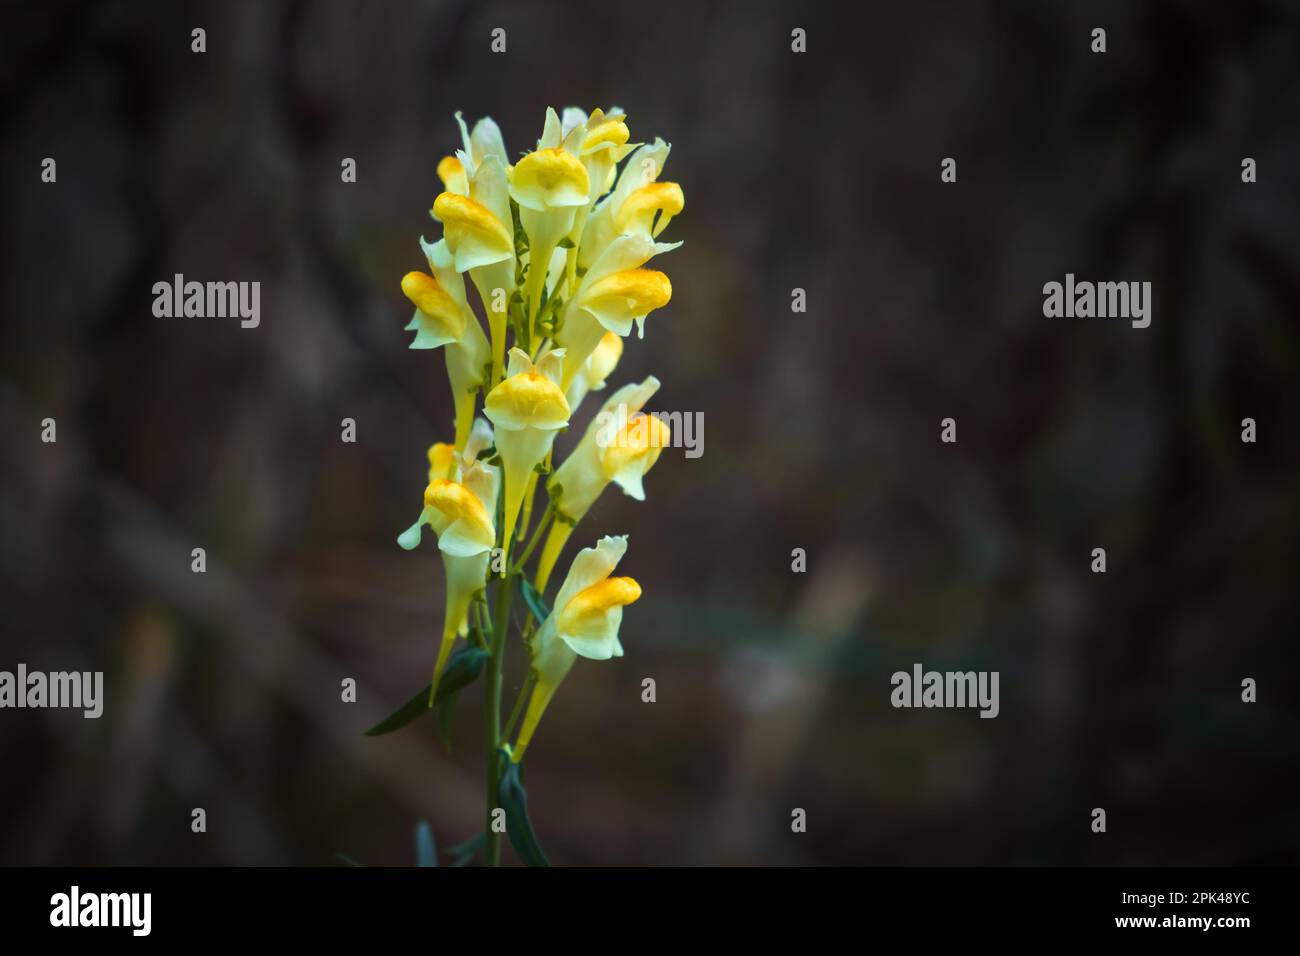 Yellow snapdragon flower on natural blurred dark background Stock Photo